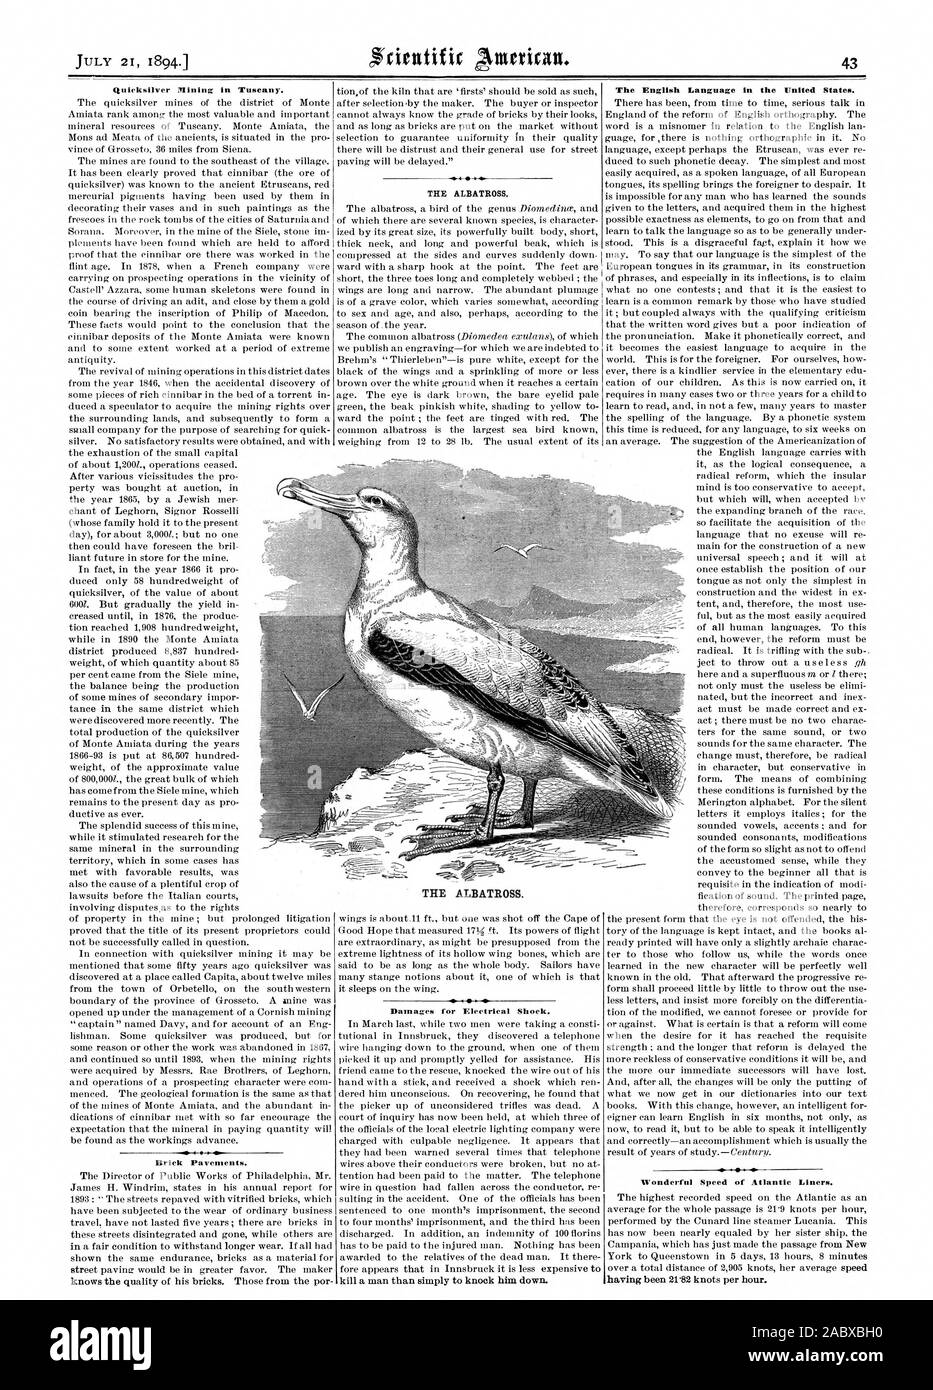 Quicksilver Mining in Tuscany. Brick Pavements. THE ALBATROSS. Damages for Electrical Shock. The English Language in the United States. Wonderful Speed of Atlantic Liners., scientific american, 1894-07-21 Stock Photo